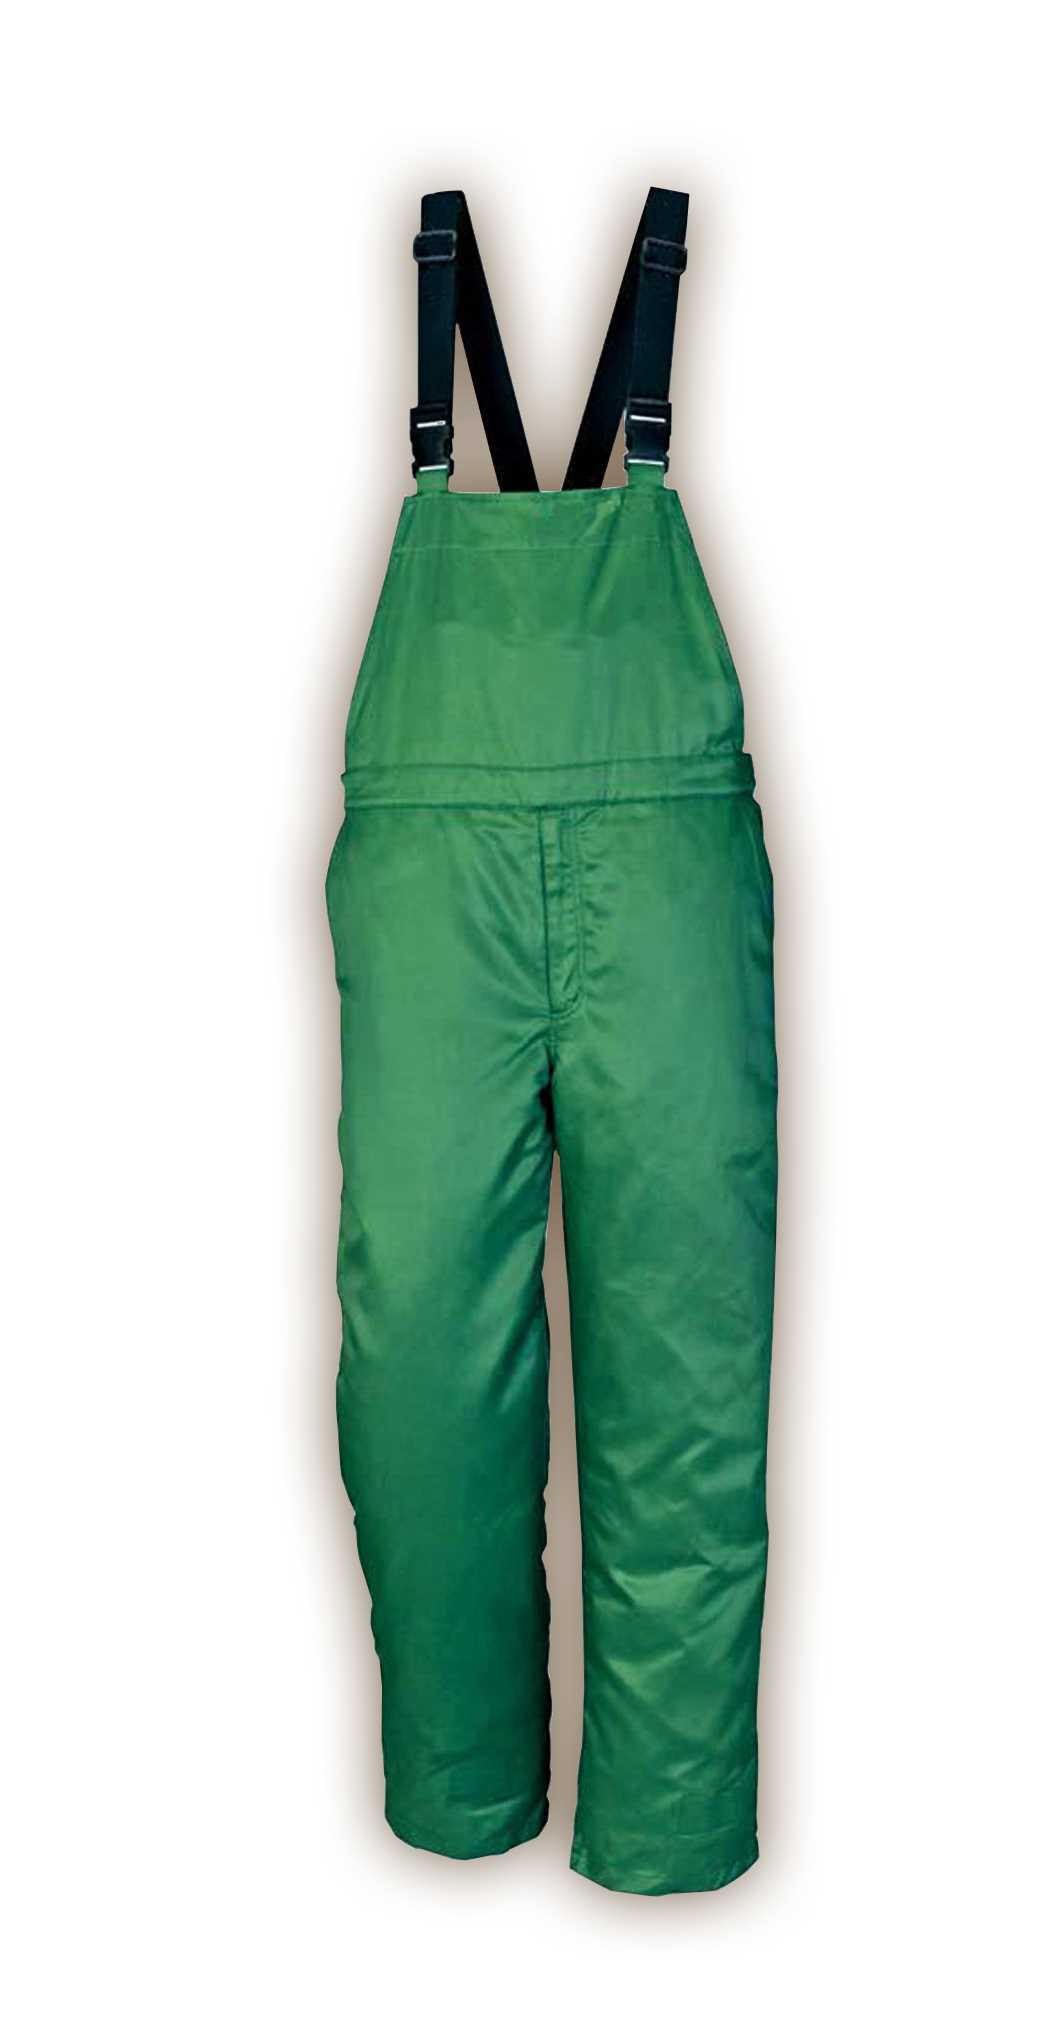 ̩Tongmao Chain Saw Protection Trousers